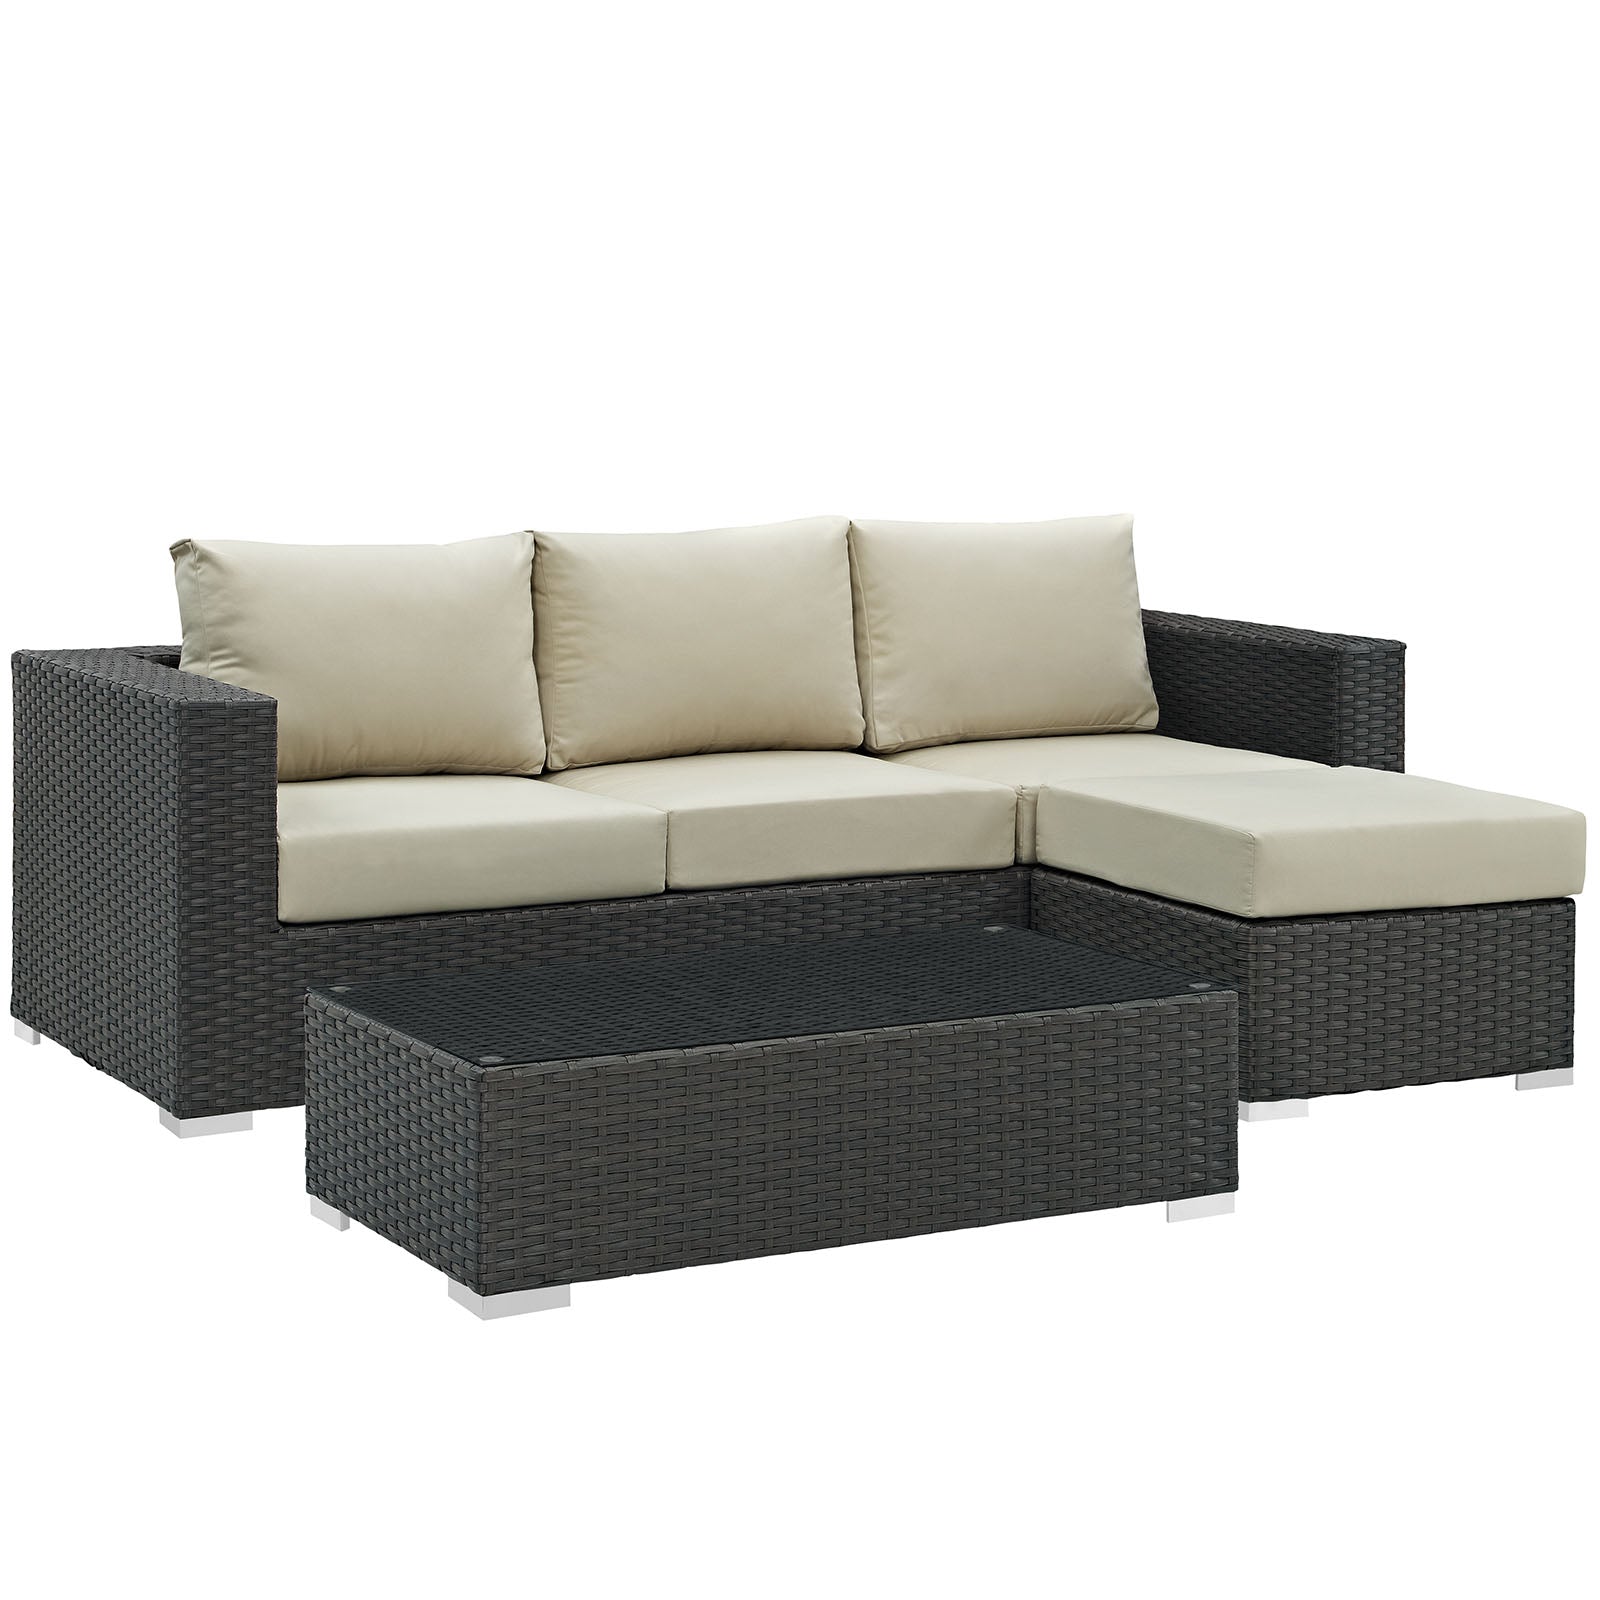 Sojourn 3 Piece 3 Seater Outdoor Patio Sunbrella Sectional Set With Ottoman